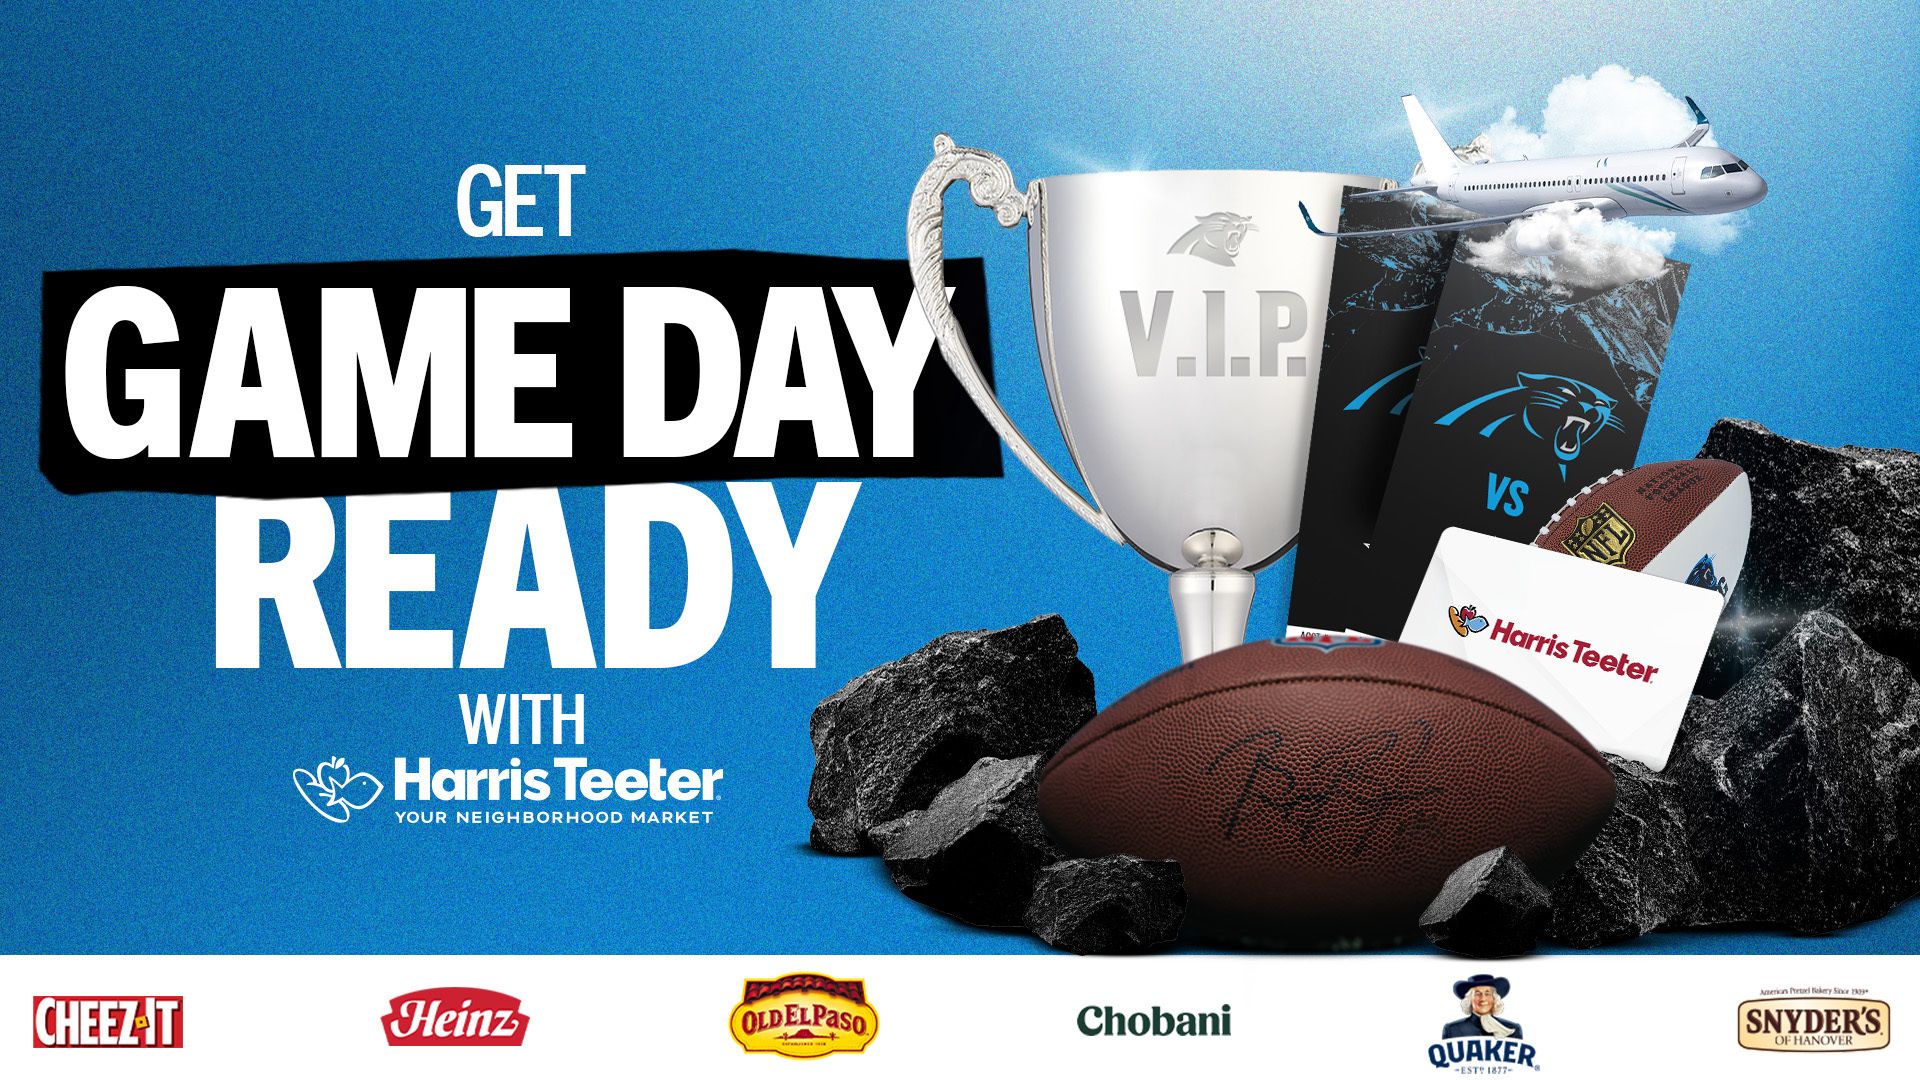 Get Game Day Ready with Harris Teeter